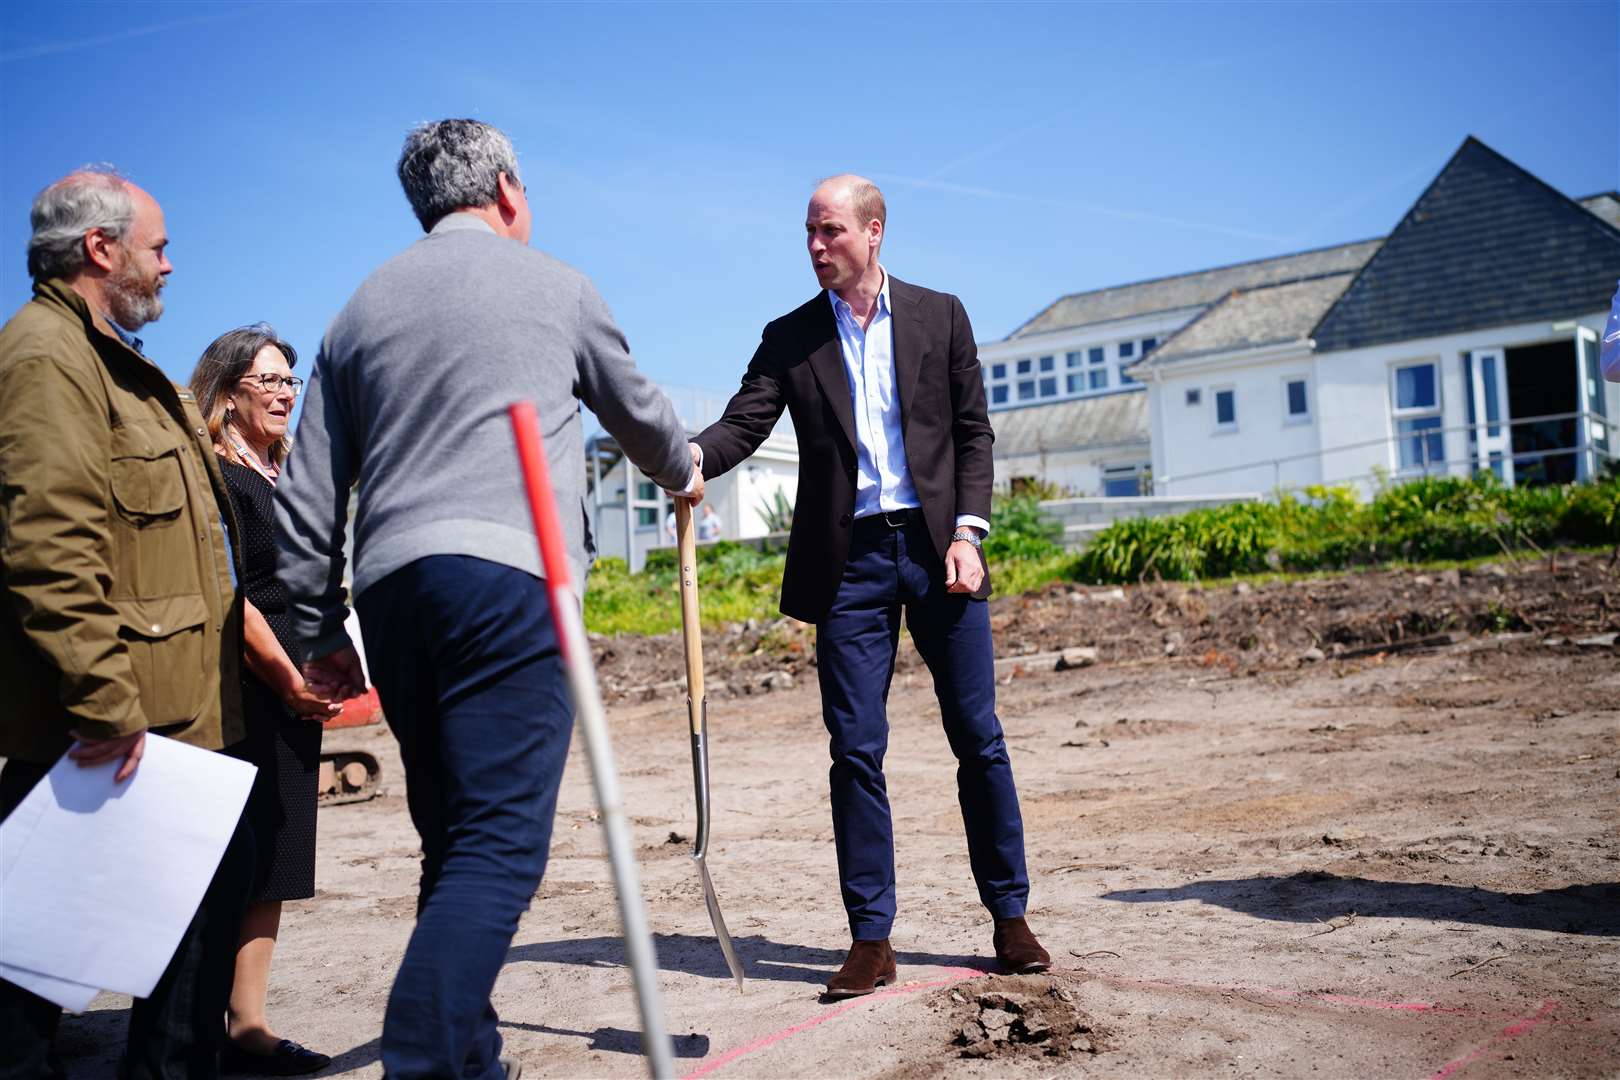 William broke new ground during a visit to St Mary’s Community Hospital (Ben Birchall/PA)